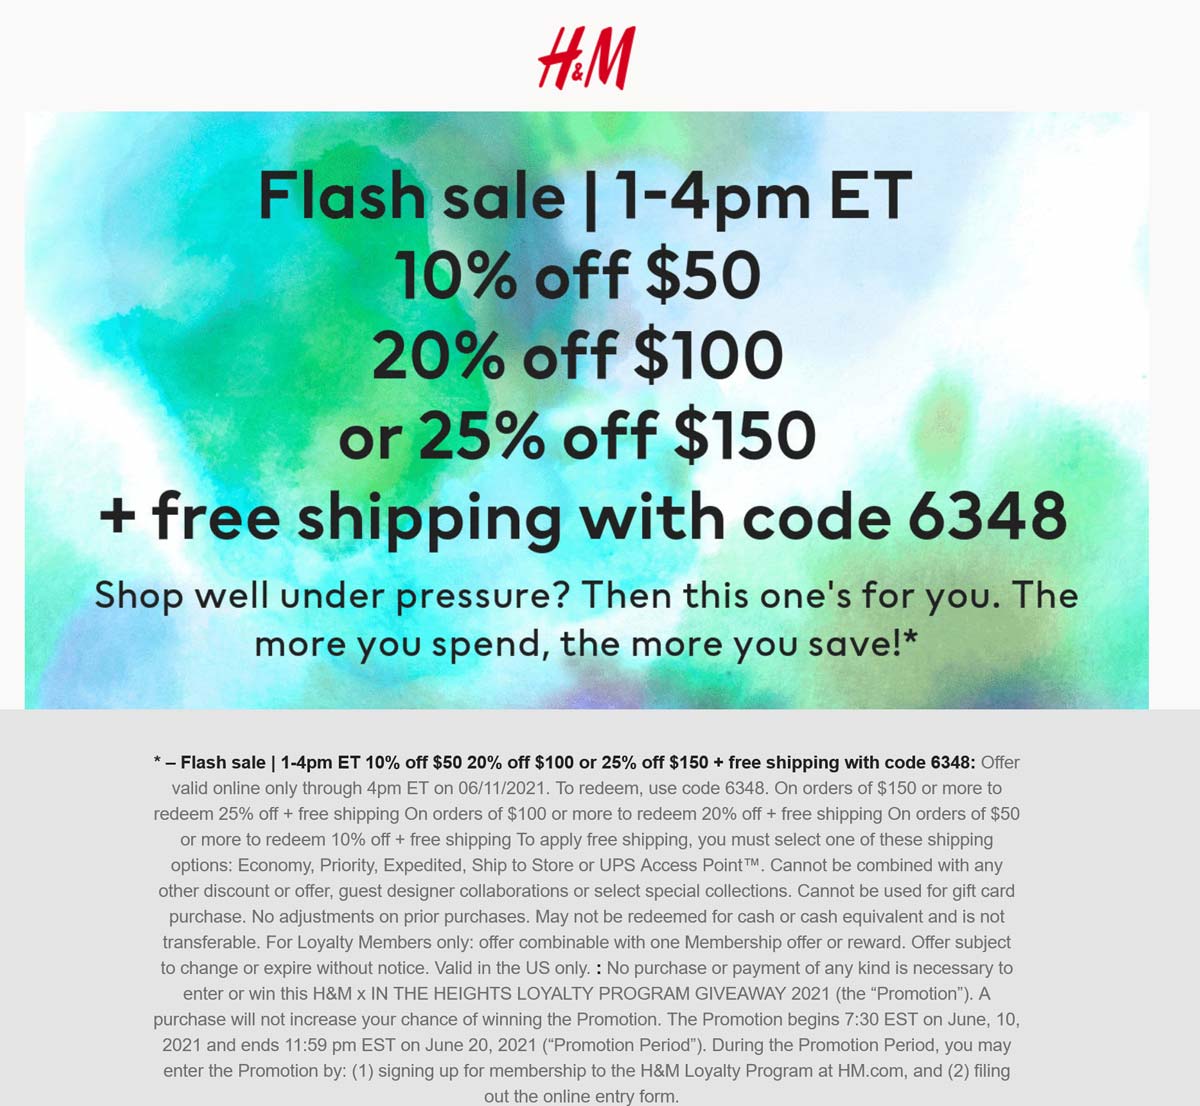 1025 off 50+ til 4p today at H&M via promo code 6348 hm The